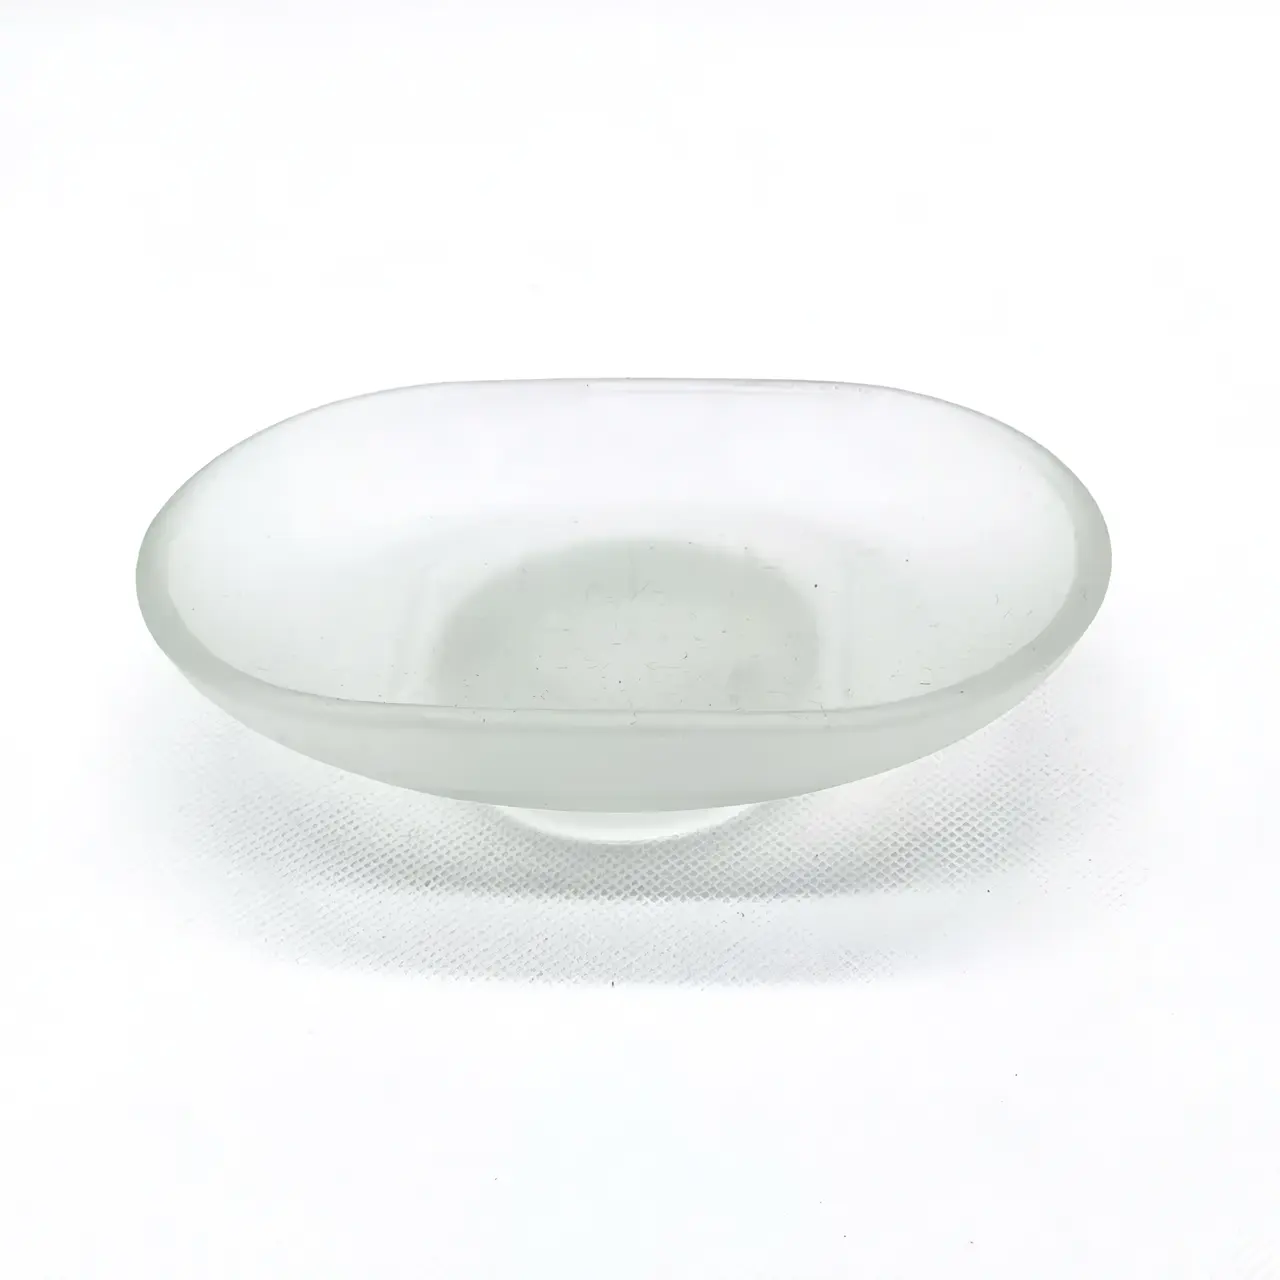 Wholesale Hot Sale Cheap Frosted Transparent Glass Soap Dish Soap Holder Bathroom Accessories